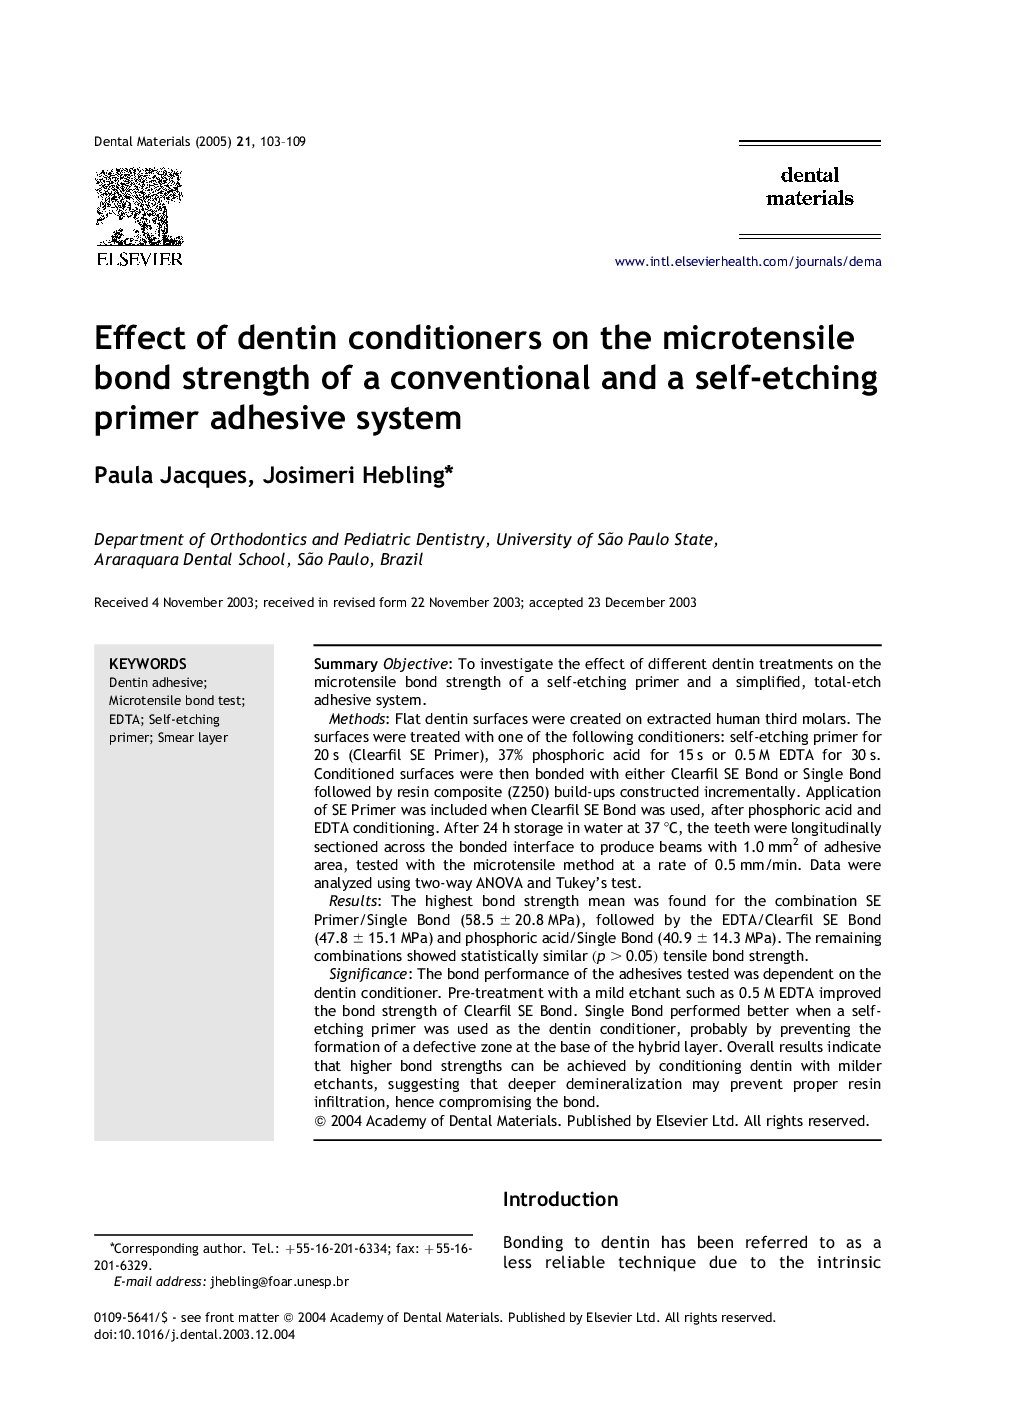 Effect of dentin conditioners on the microtensile bond strength of a conventional and a self-etching primer adhesive system